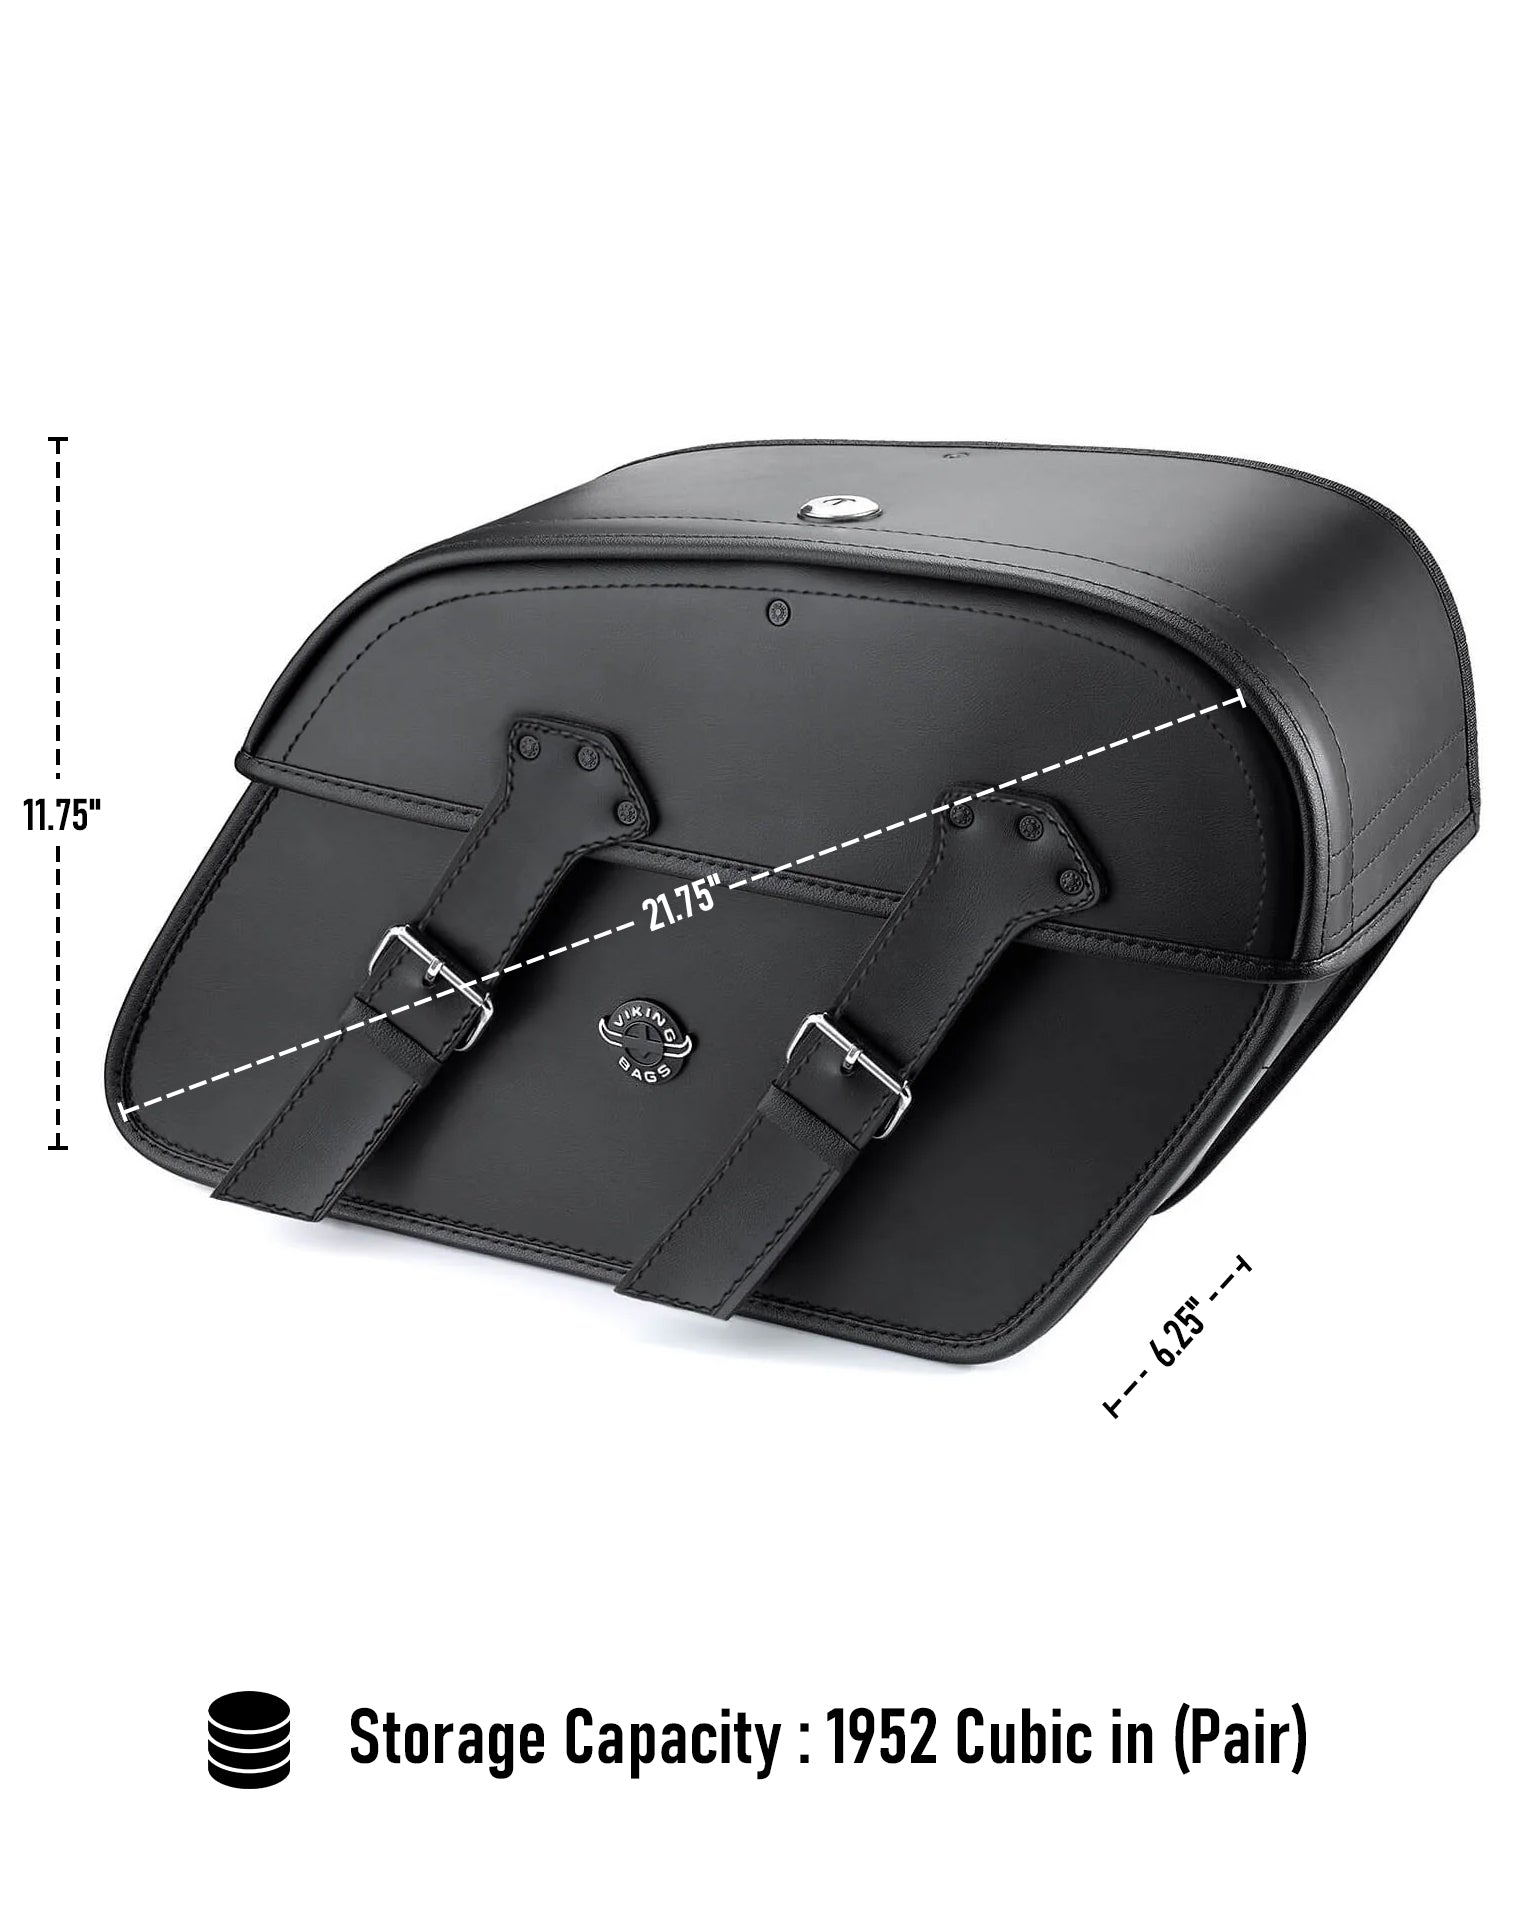 Viking Raven Large Yamaha Silverado Motorcycle Leather Saddlebags Can Store Your Ridings Gears